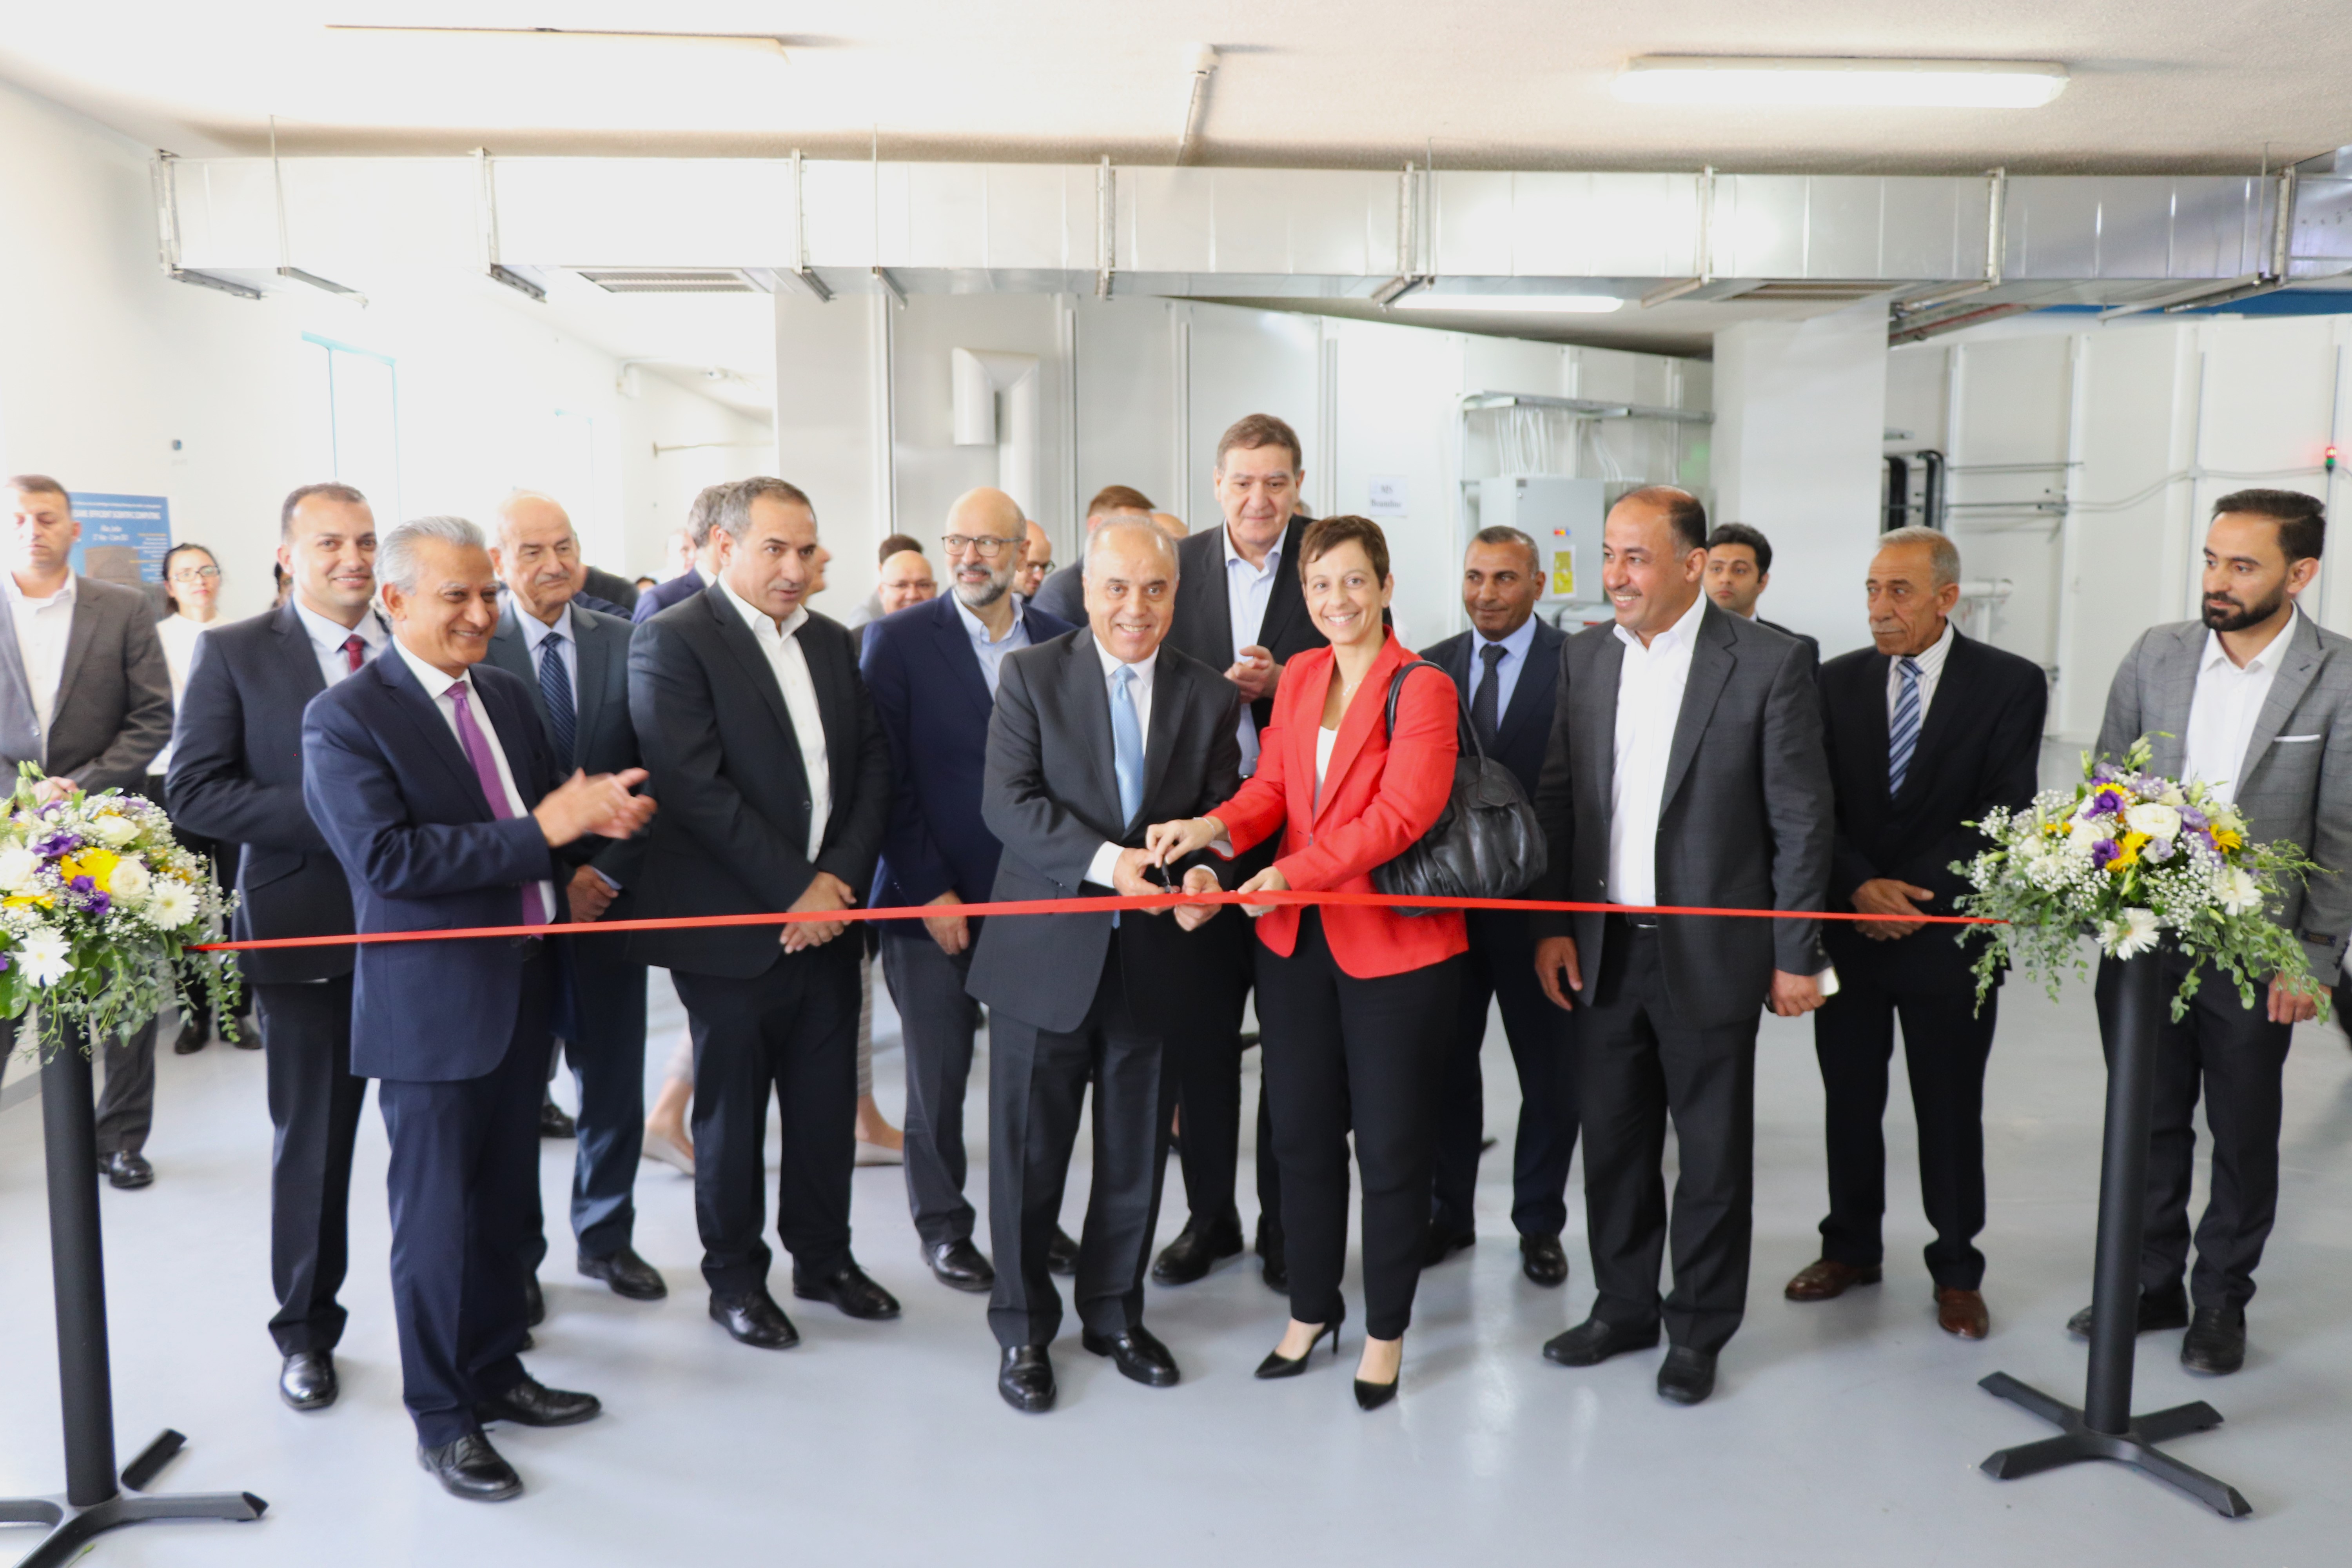 © SESAME 2023: Dignitaries formally inaugurate BEATS. Cutting the ribbon are (left to right):  Prof. Azmi Mahafzah, Minister of Higher Education and Scientific Research of Jordan, SESAME Director, Khaled Toukan and H.E. Ms Maria Hadjitheodosiou, Ambassador of the European Union to Jordan.